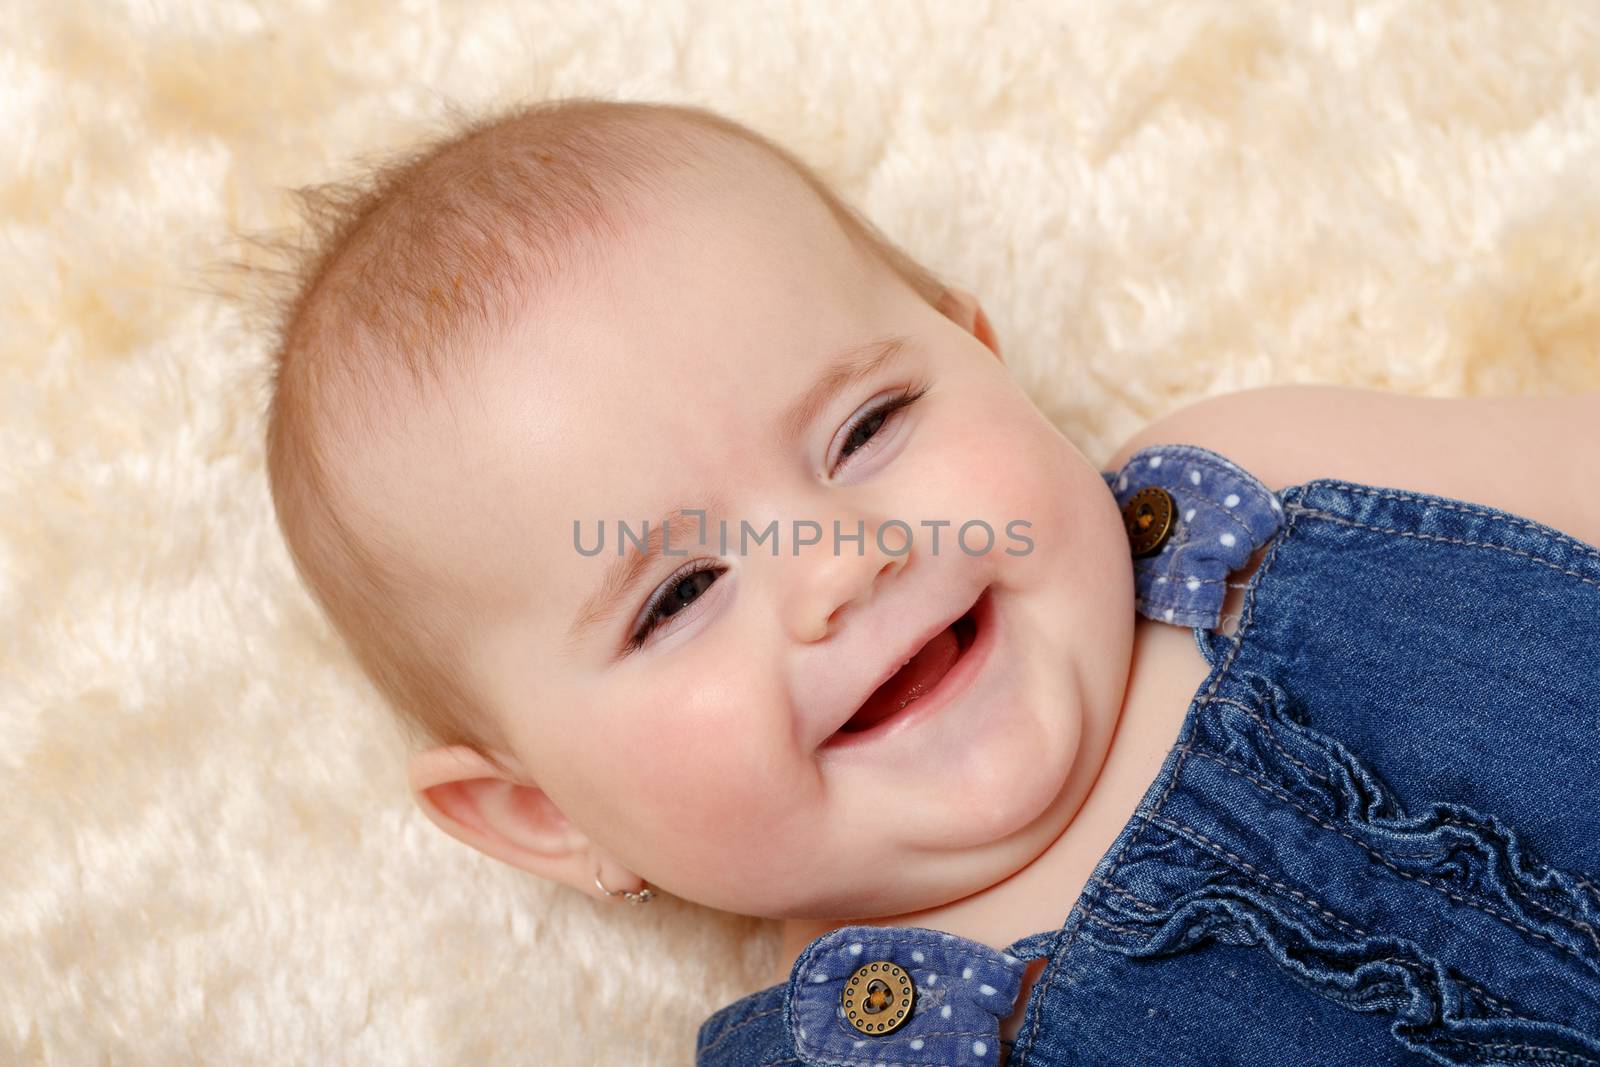 smiling infant baby - the first year of the new life